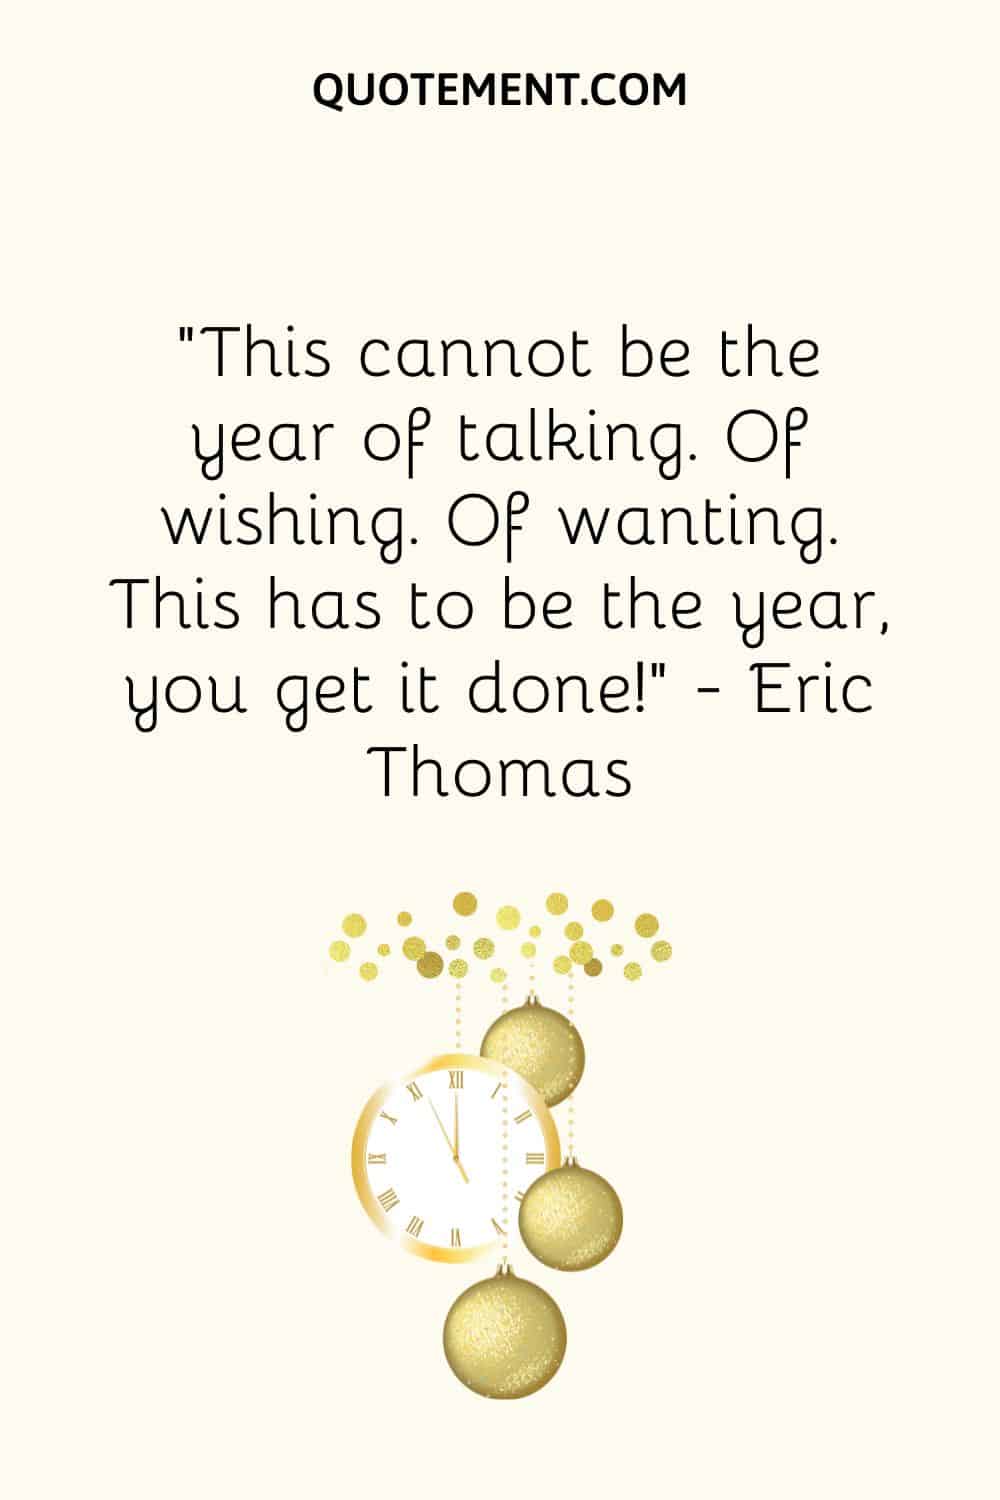 “This cannot be the year of talking. Of wishing. Of wanting. This has to be the year you get it done!” ― Eric Thomas